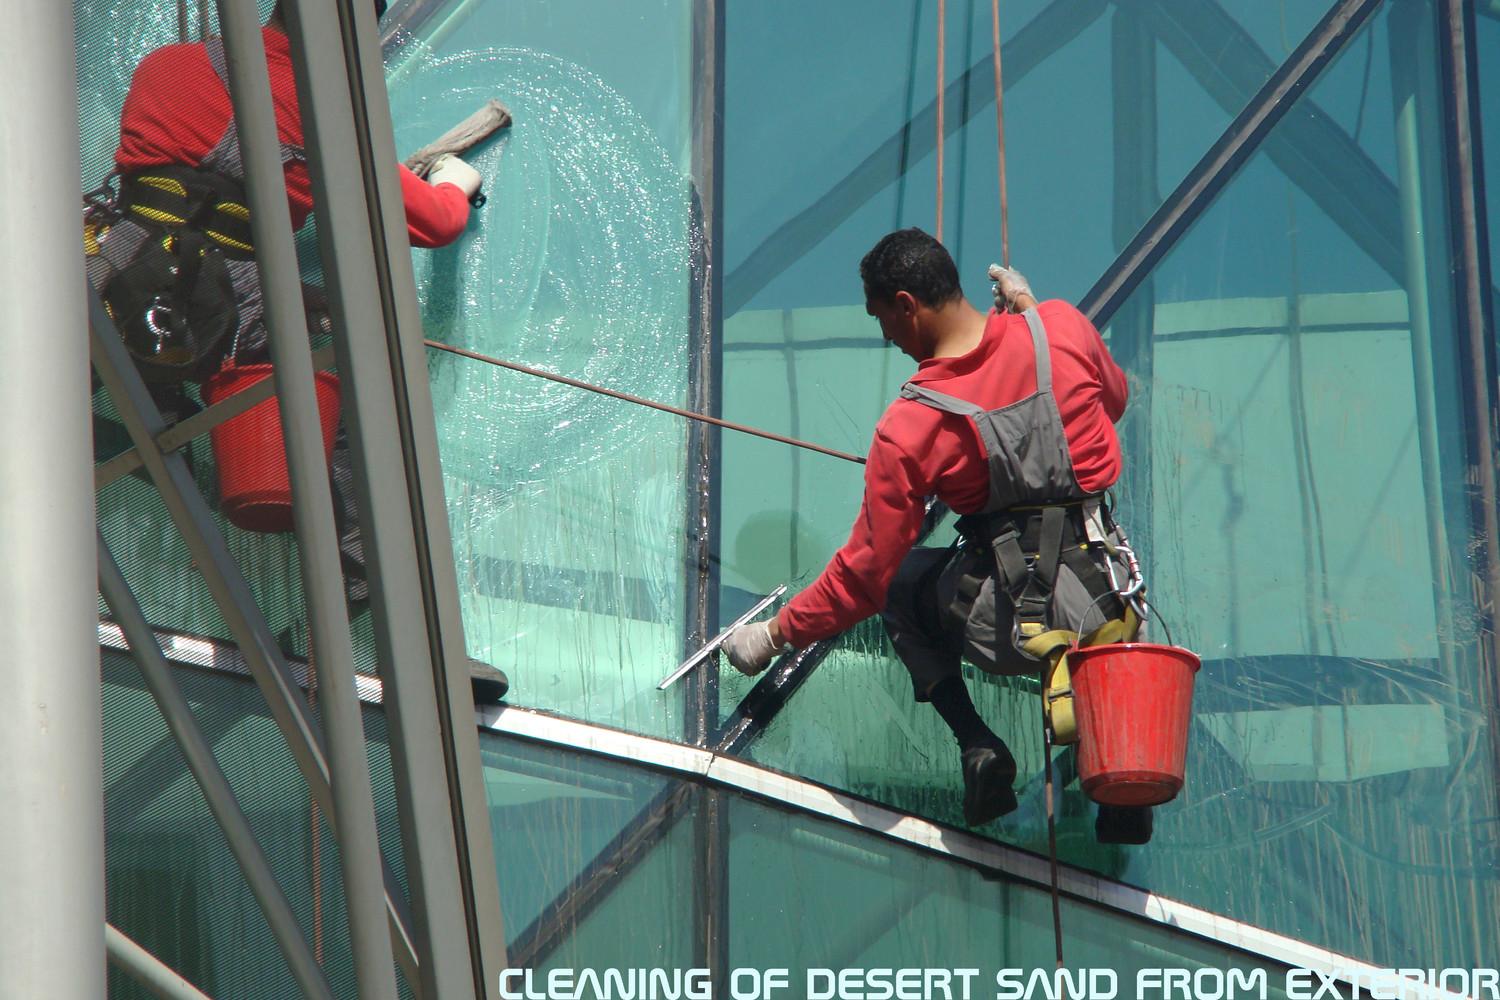 Cleaning of desert sand from interior